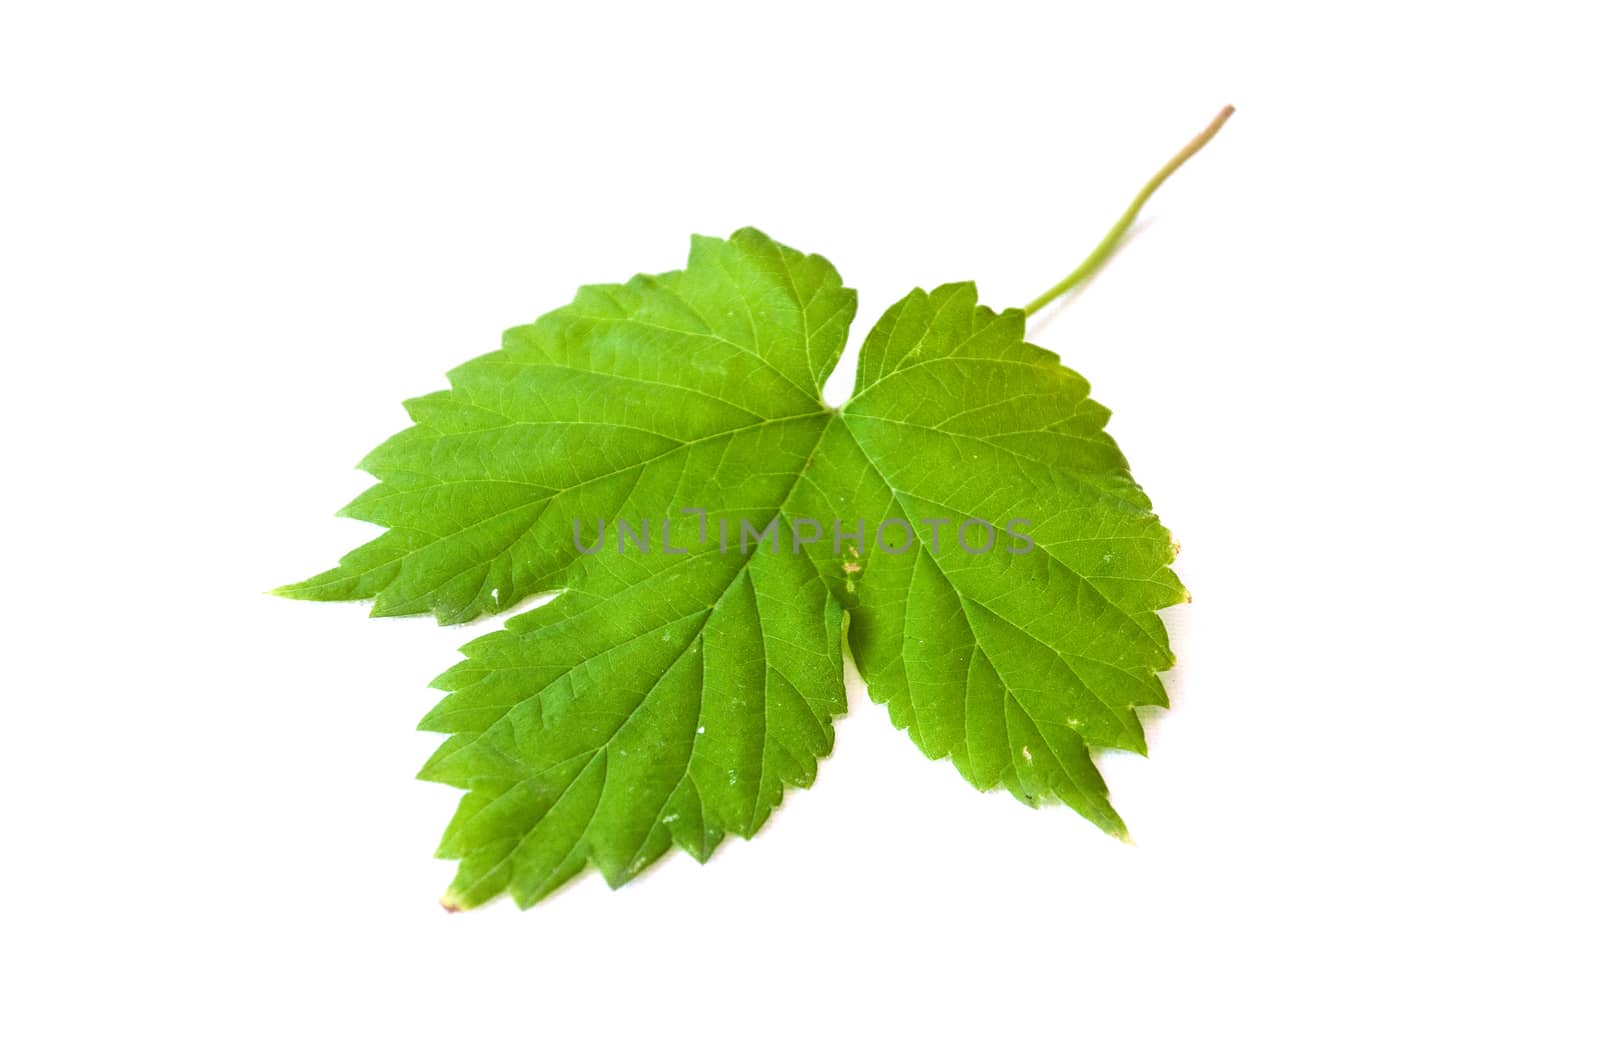 Isolated leaf of vine  on white background by NeydtStock